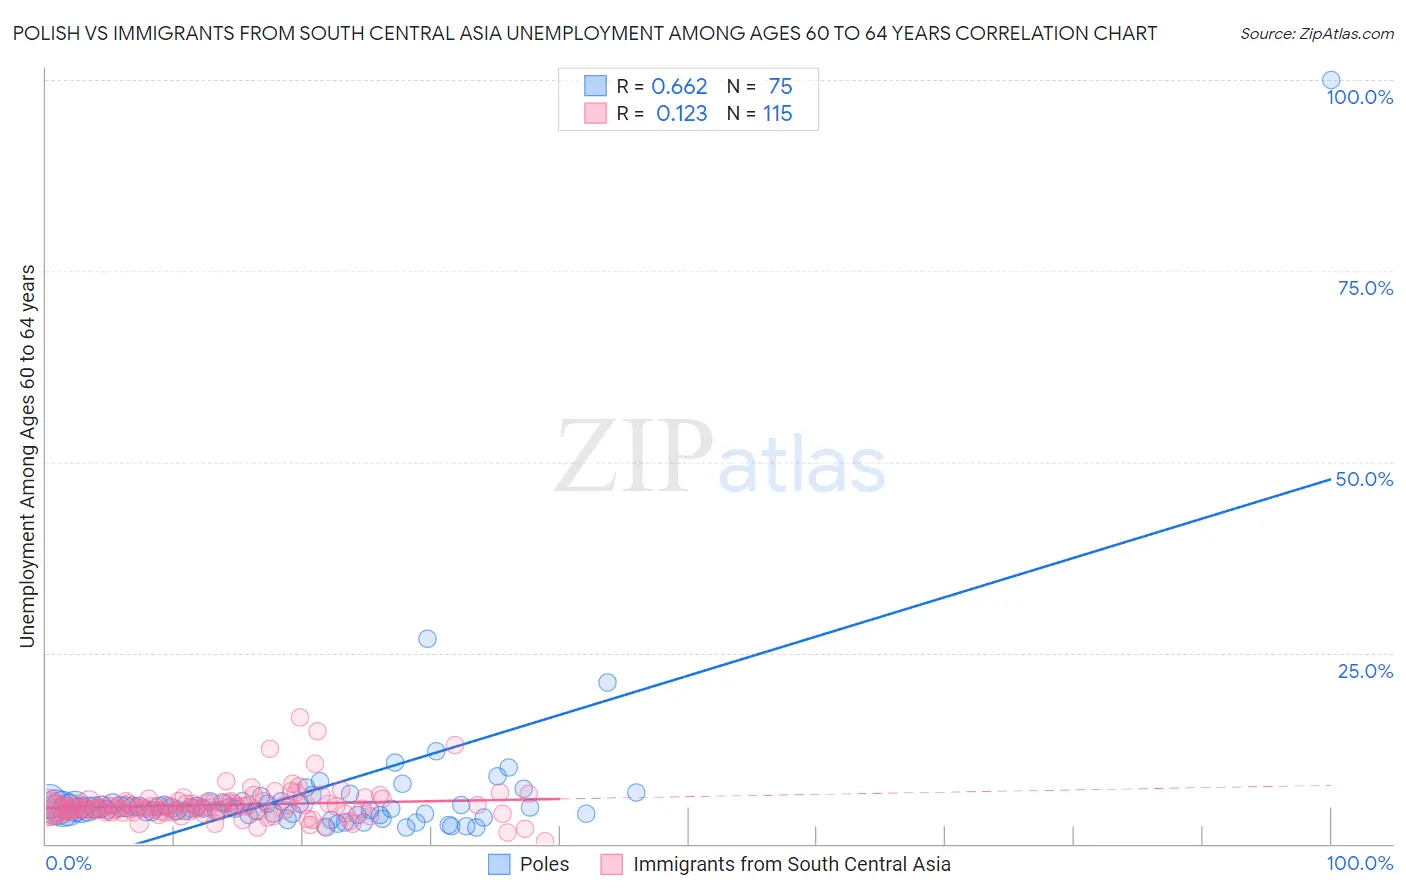 Polish vs Immigrants from South Central Asia Unemployment Among Ages 60 to 64 years